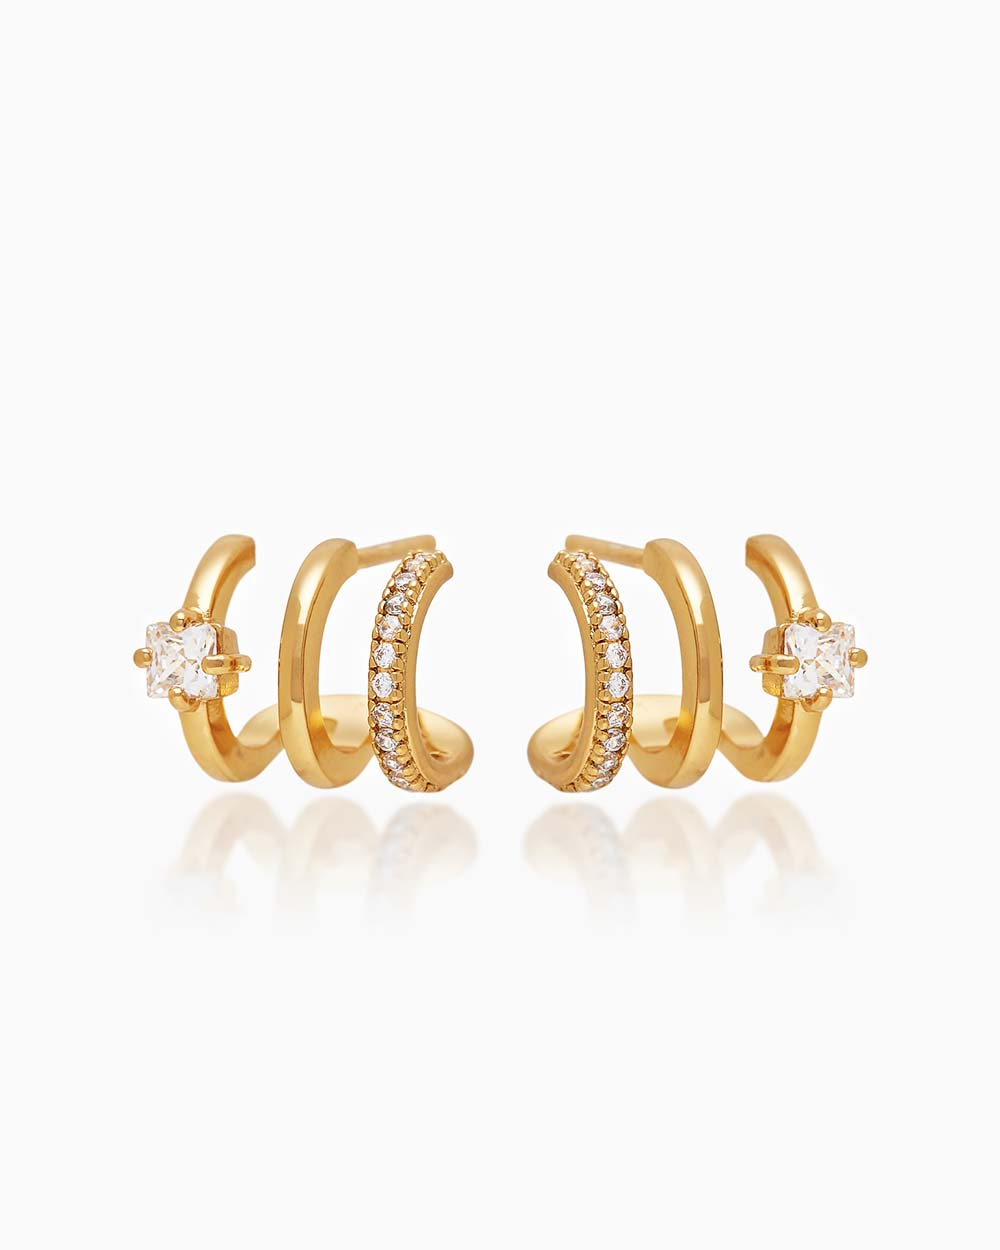 The Anya Huggies, gold illusion earrings that give you three petite hoops and styles in one